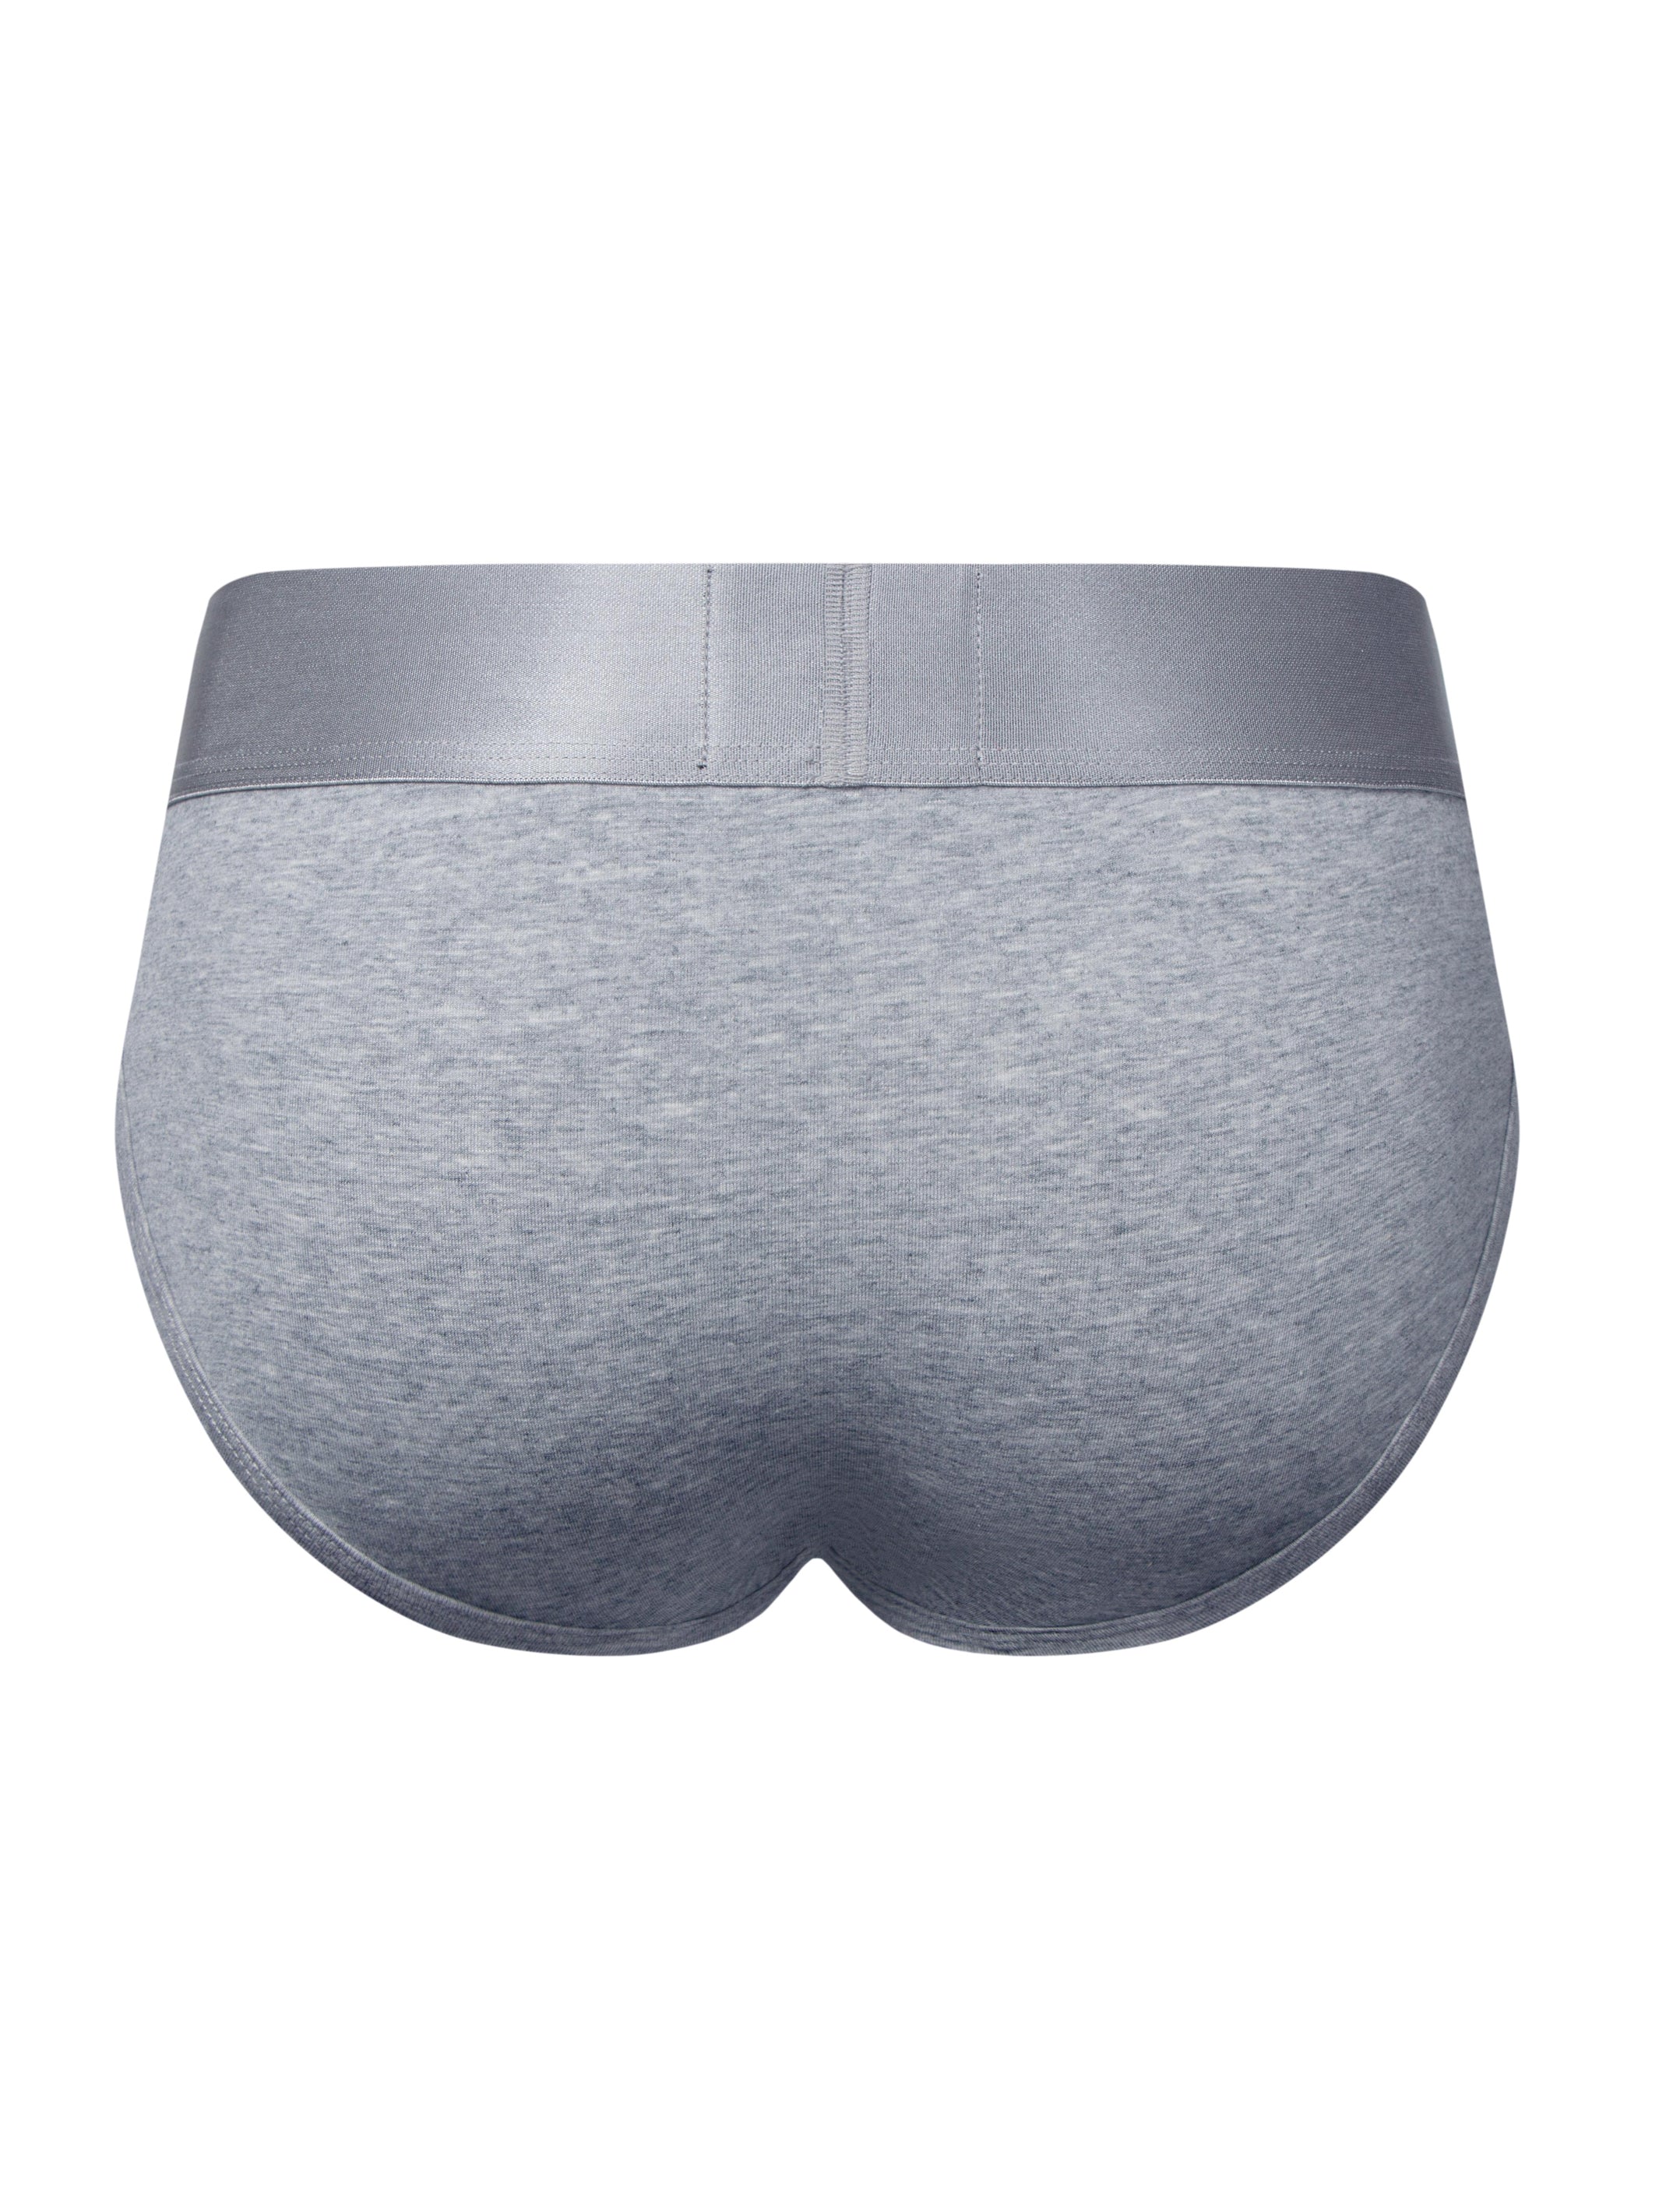 A product photo of a pair of grey Phantom Briefs taken from the back.